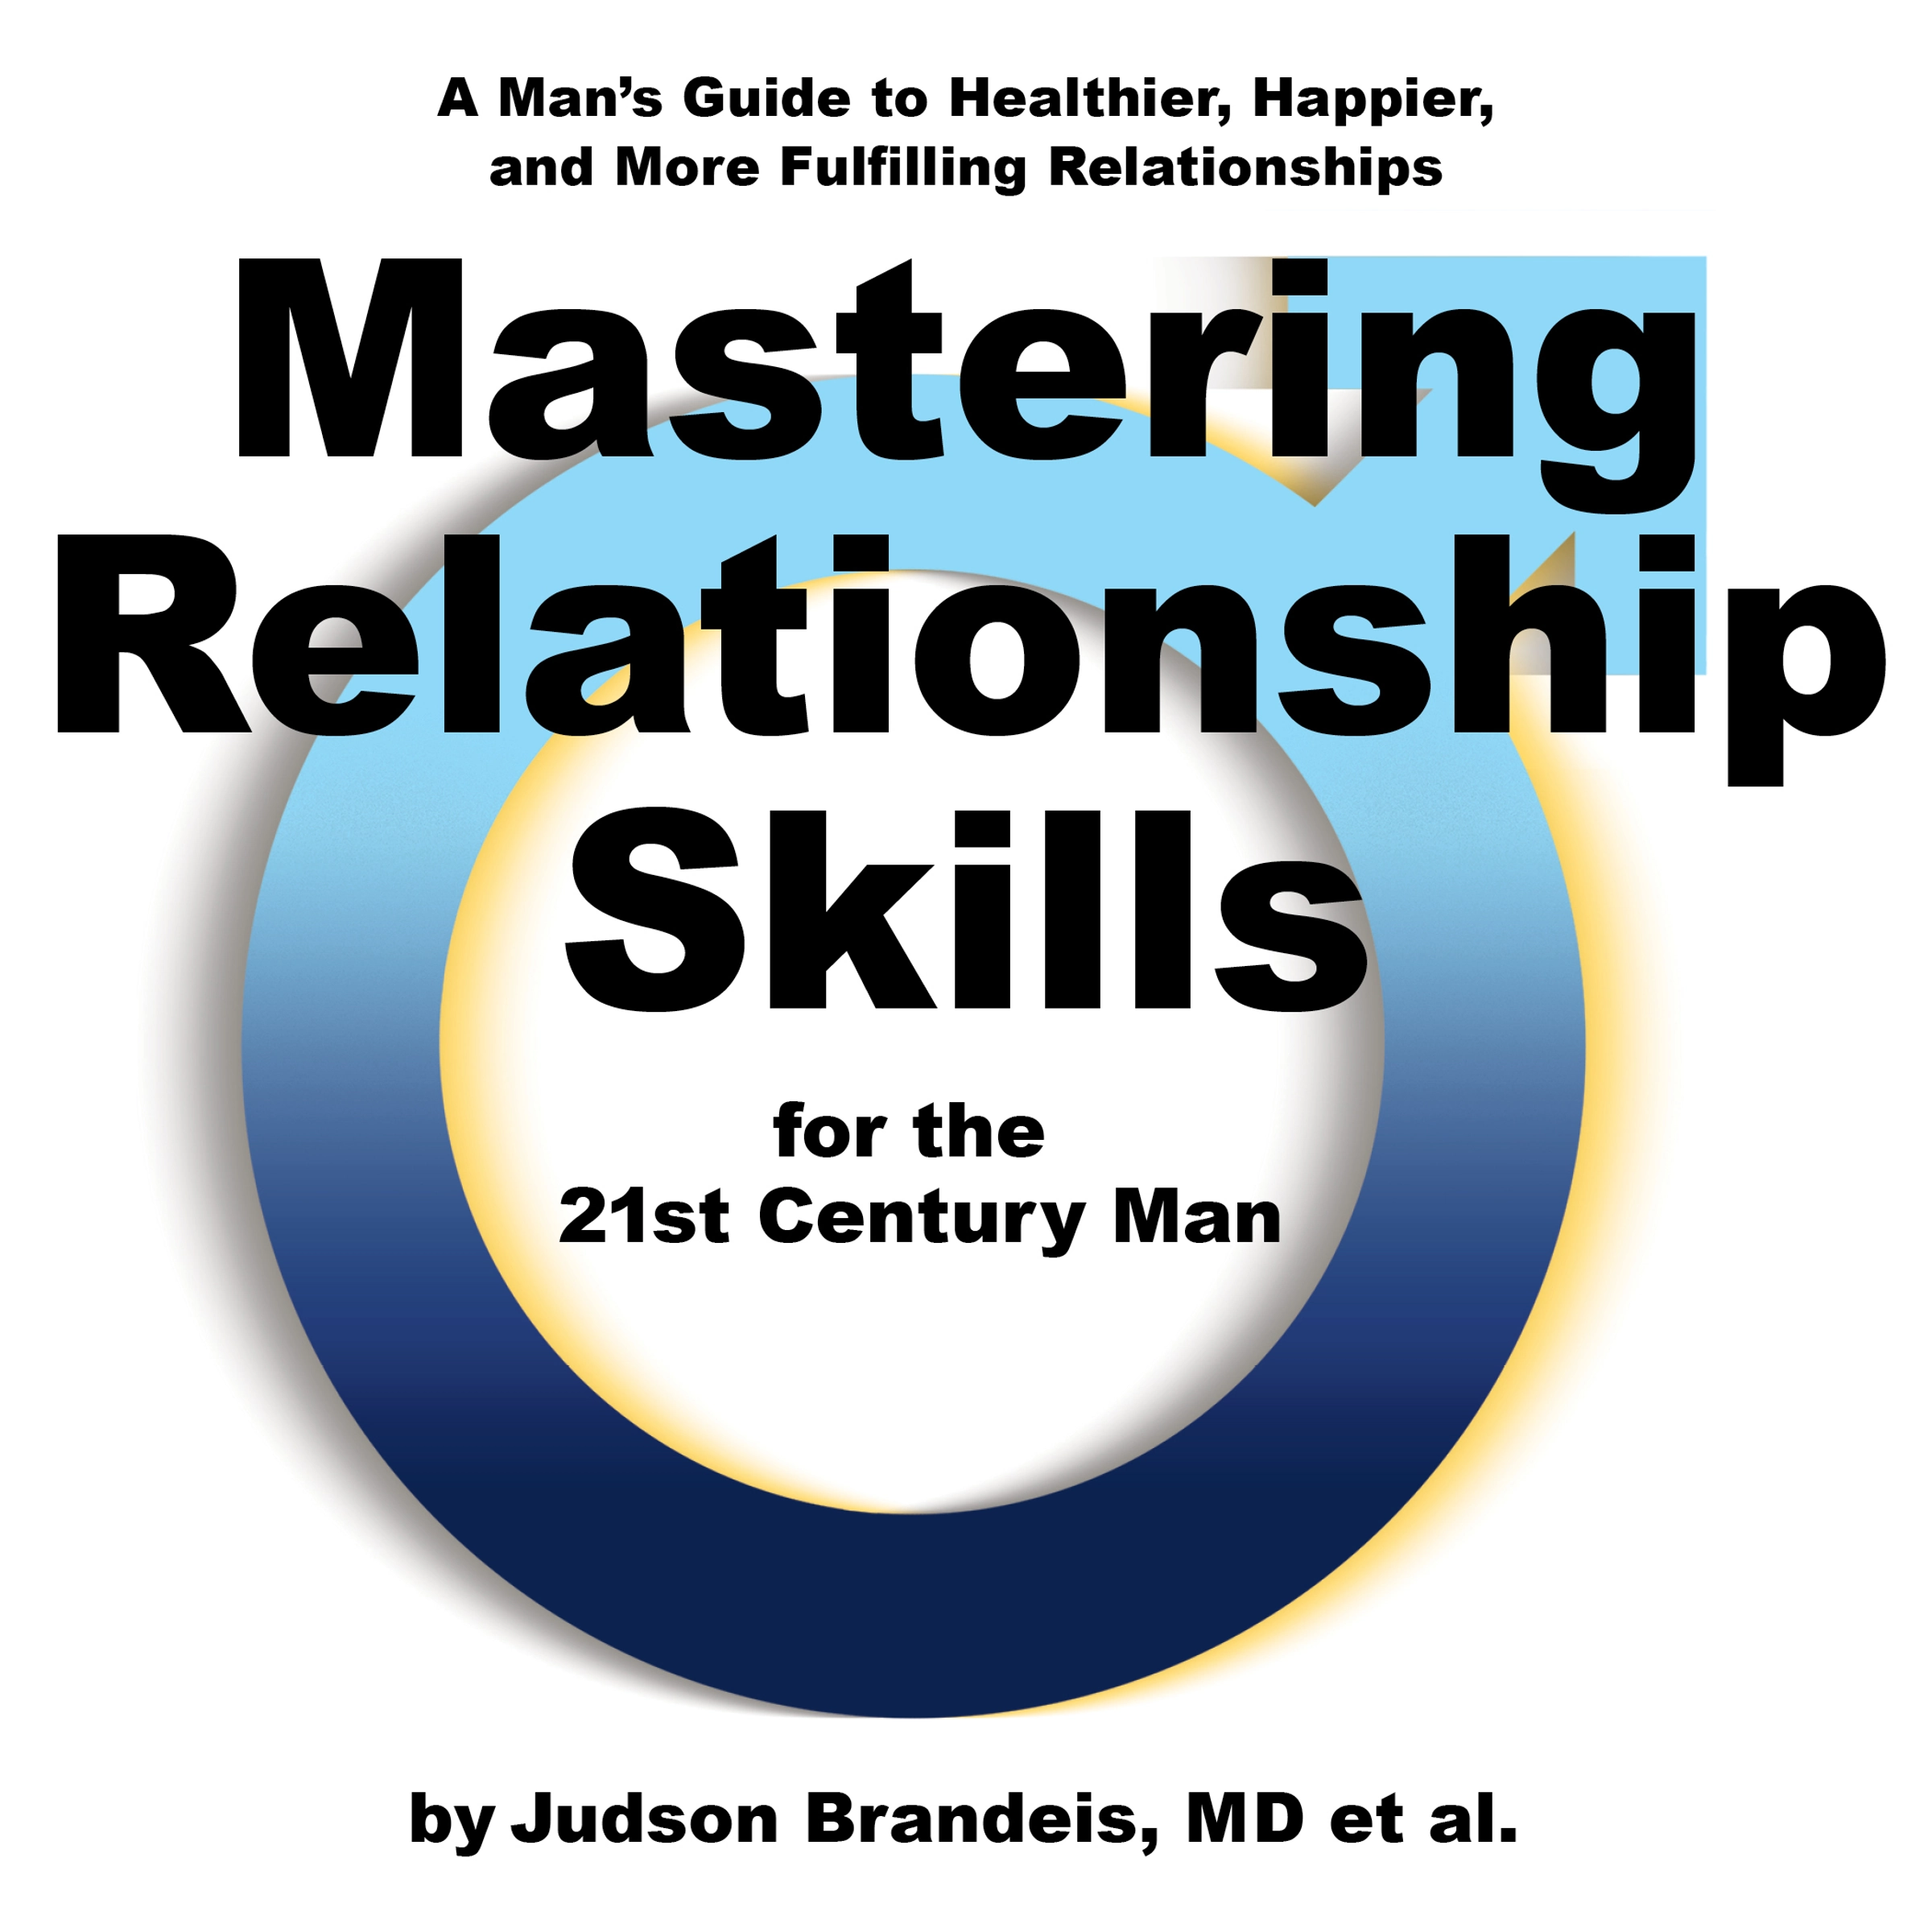 Mastering Relationship Skills for the 21st Century Man Audiobook by Judson Brandeis M.D.